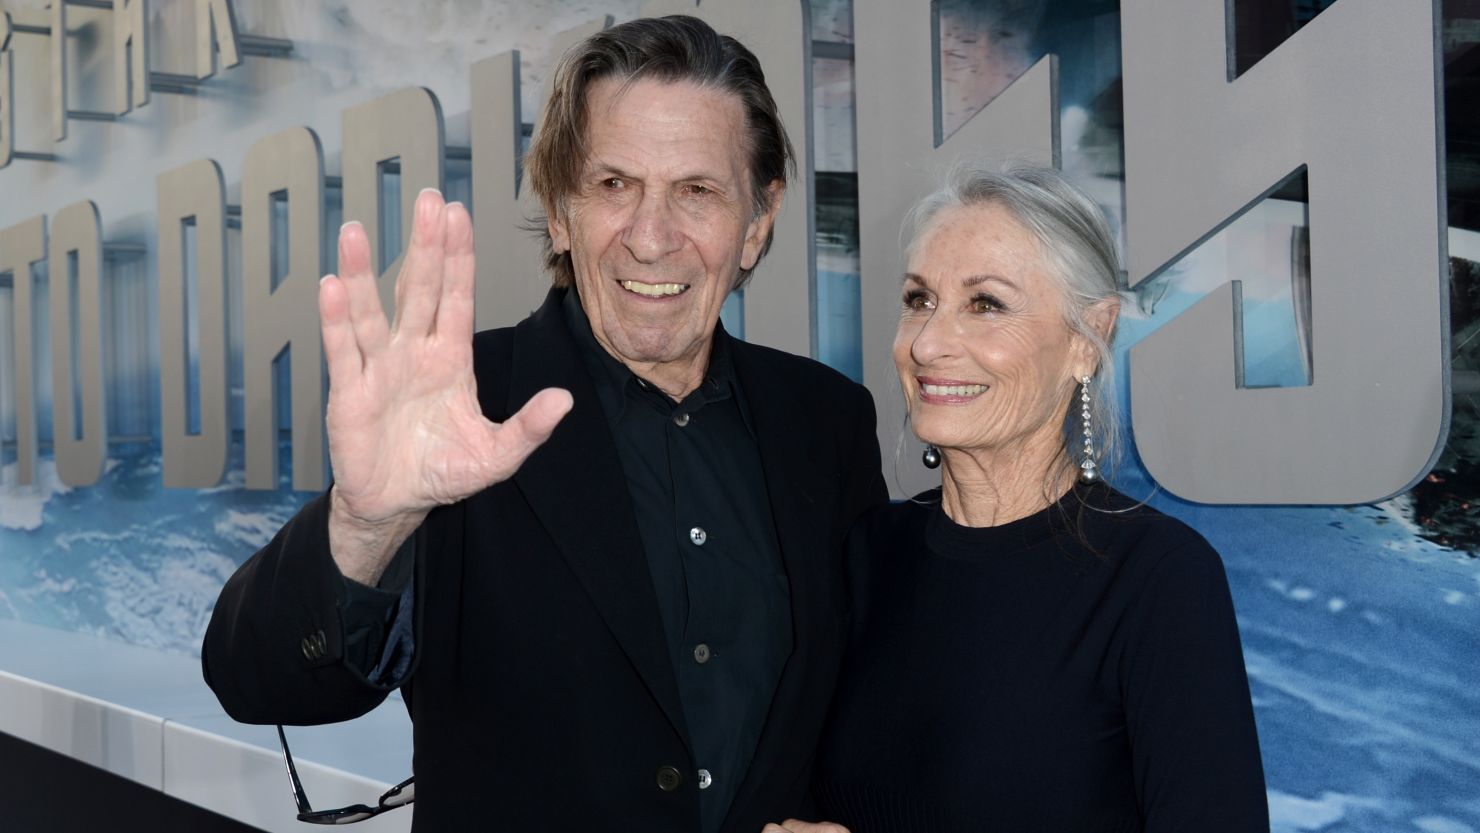 Leonard Nimoy arrives at the "Star Trek Into Darkness" premiere in May 2013.